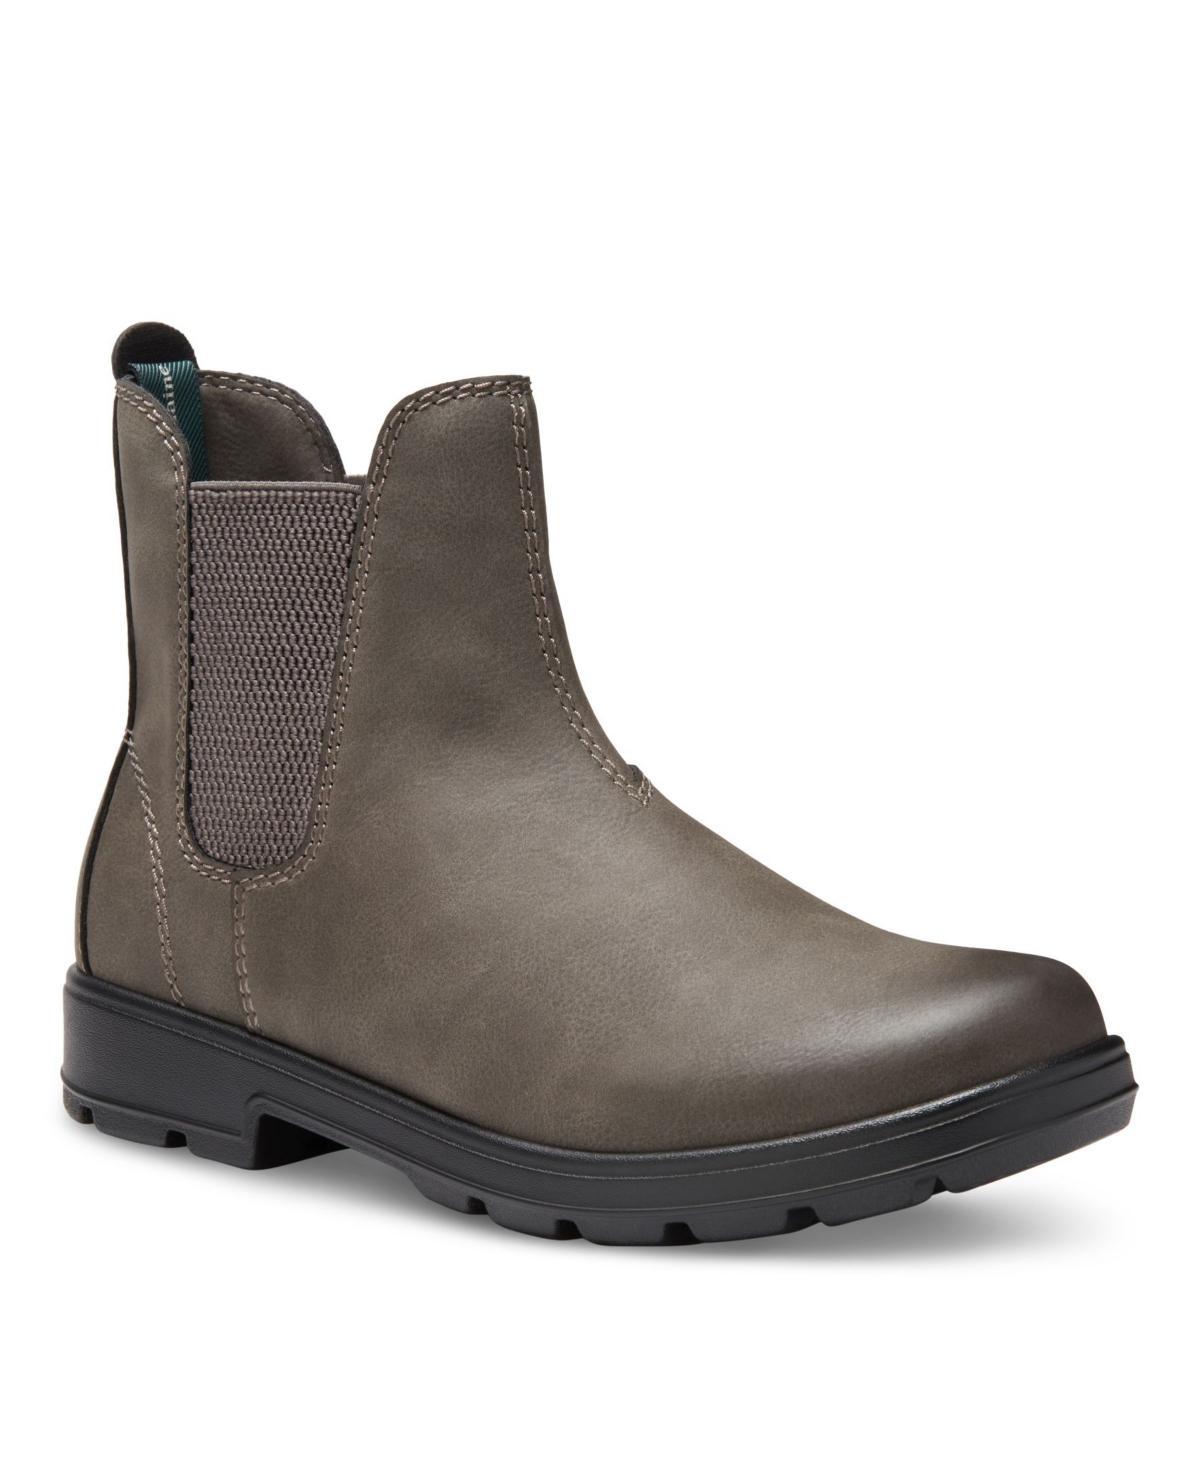 Mens Cyrus Chelsea Boots Mens Shoes Product Image